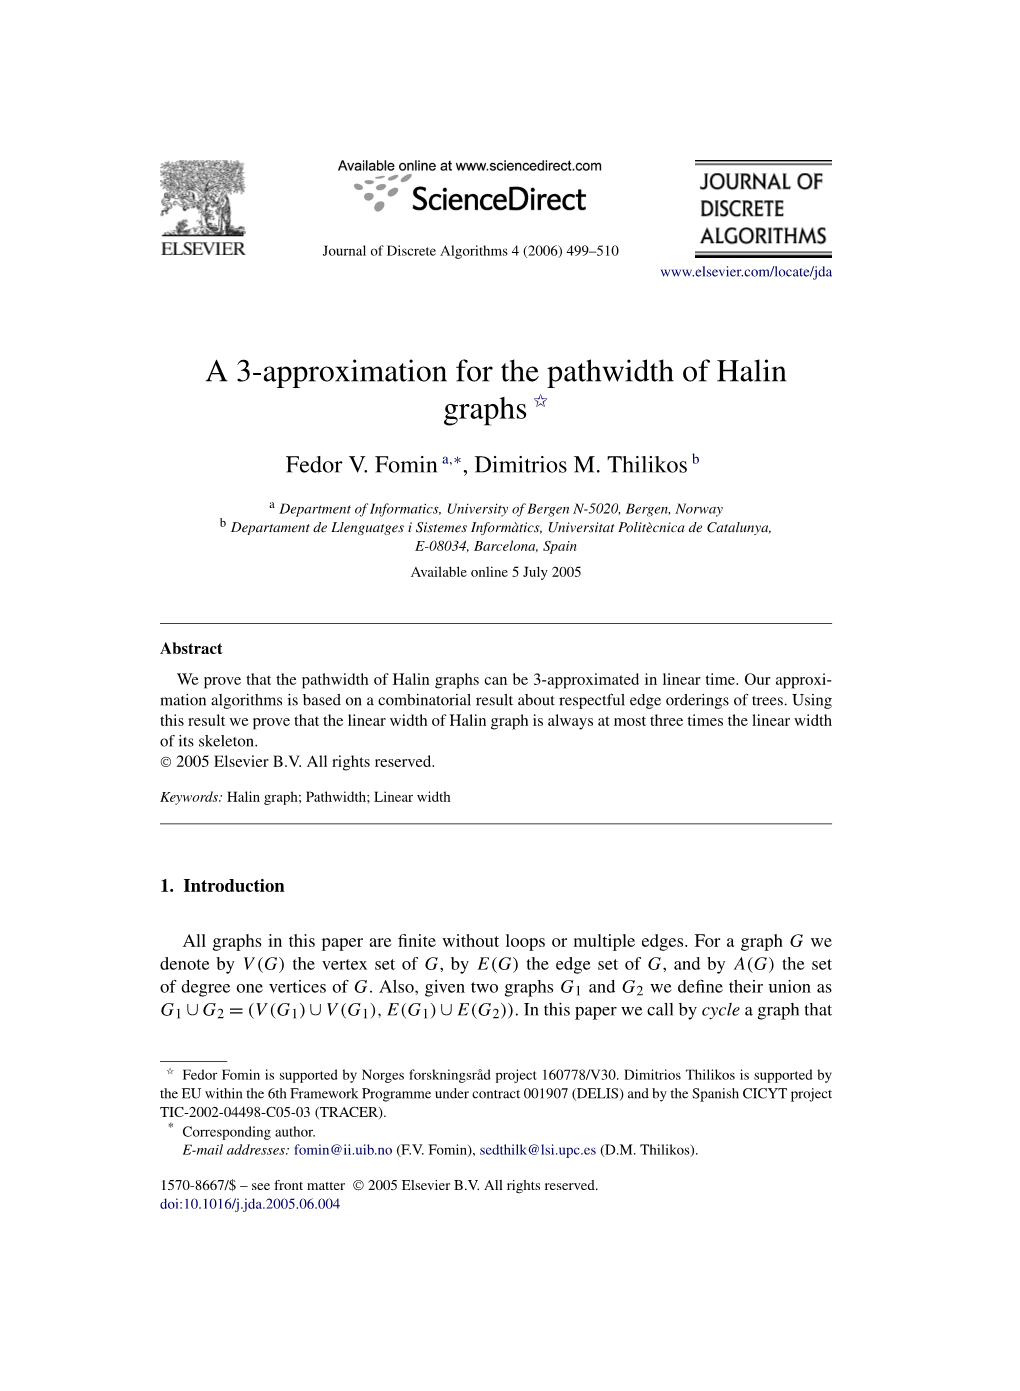 A 3-Approximation for the Pathwidth of Halin Graphs ✩